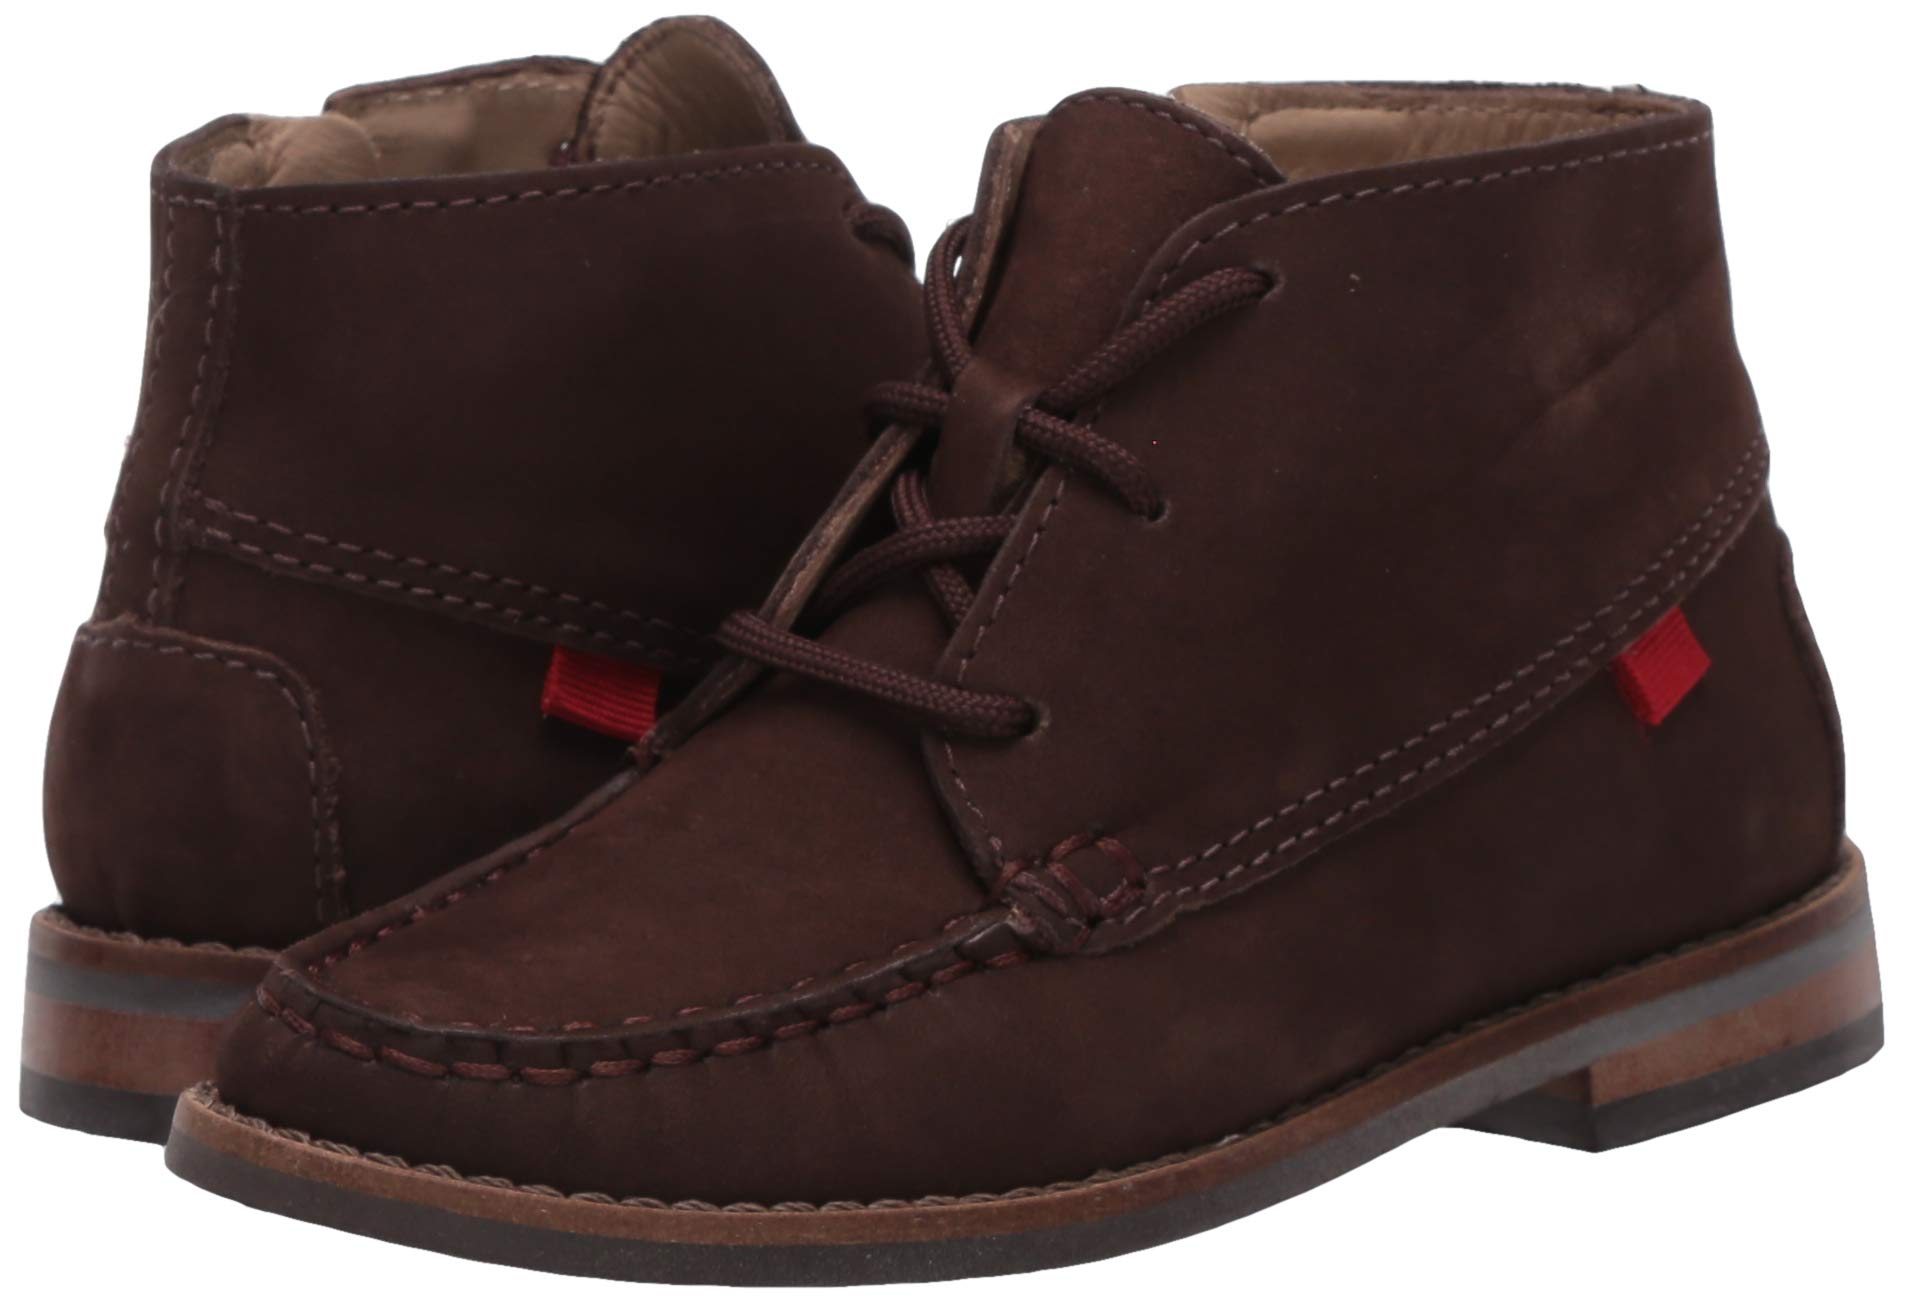 Marc Joseph New York Unisex-Kid's Leather Made in Brazil Chukka Ankle Boot with Laces, Brown Nubuck, 1.5 M US Little Kid